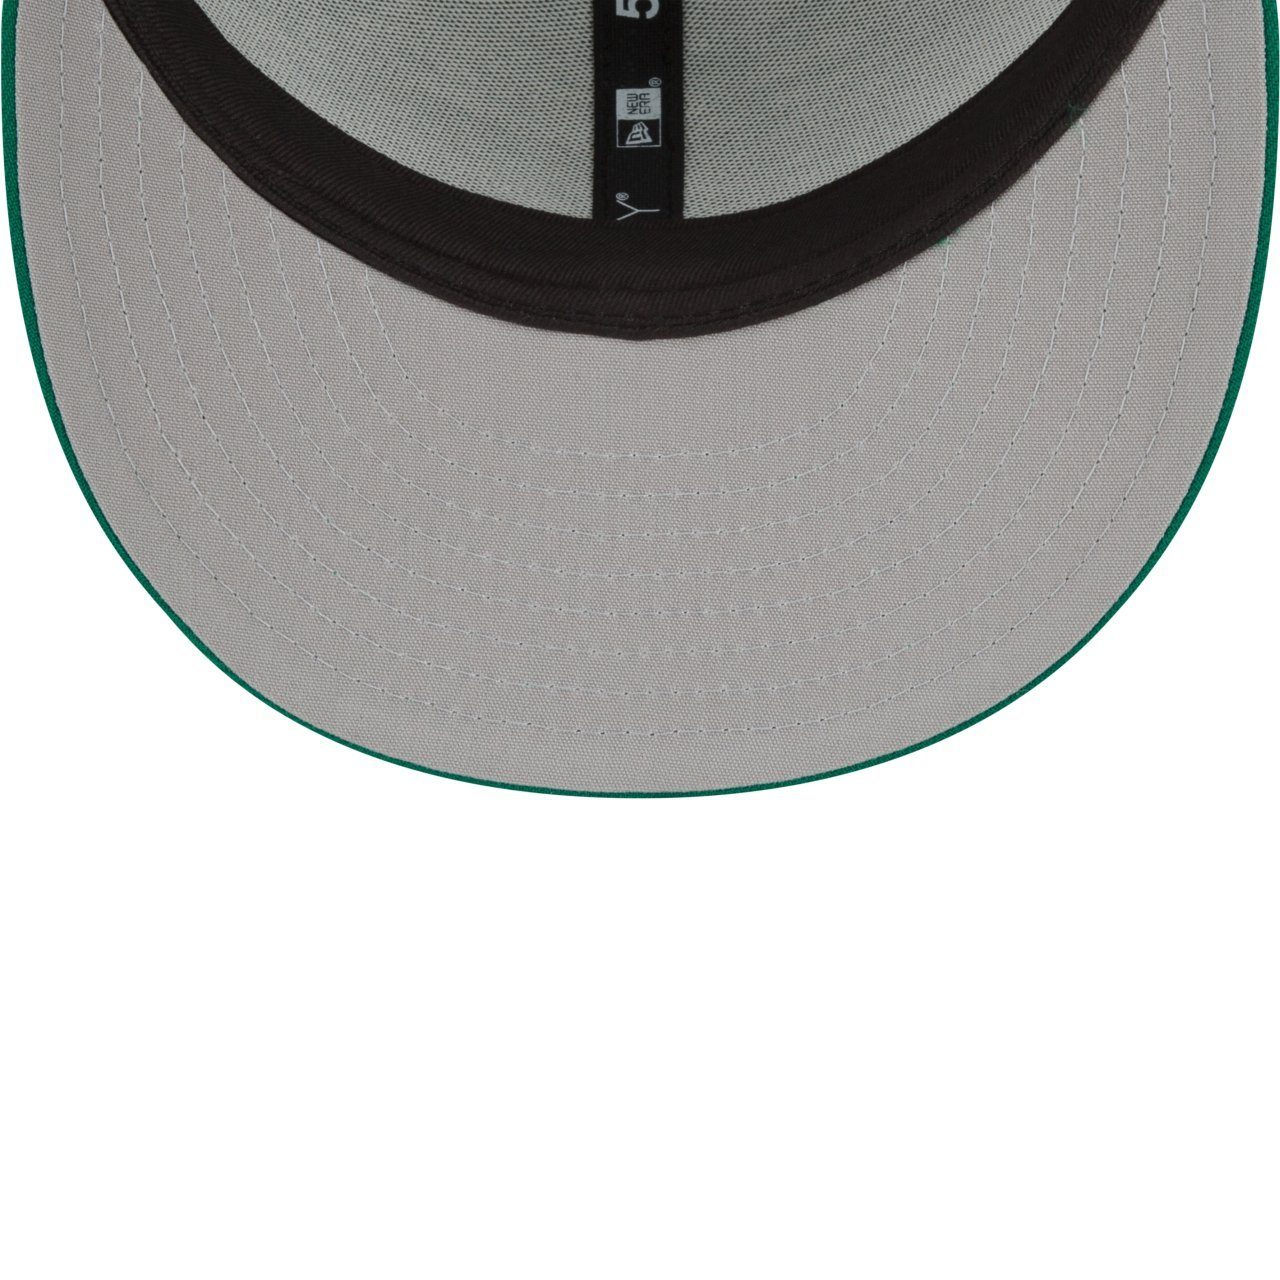 Era PATRICK’S Fitted Low 59Fifty Cap Profile New New York DAY ST.